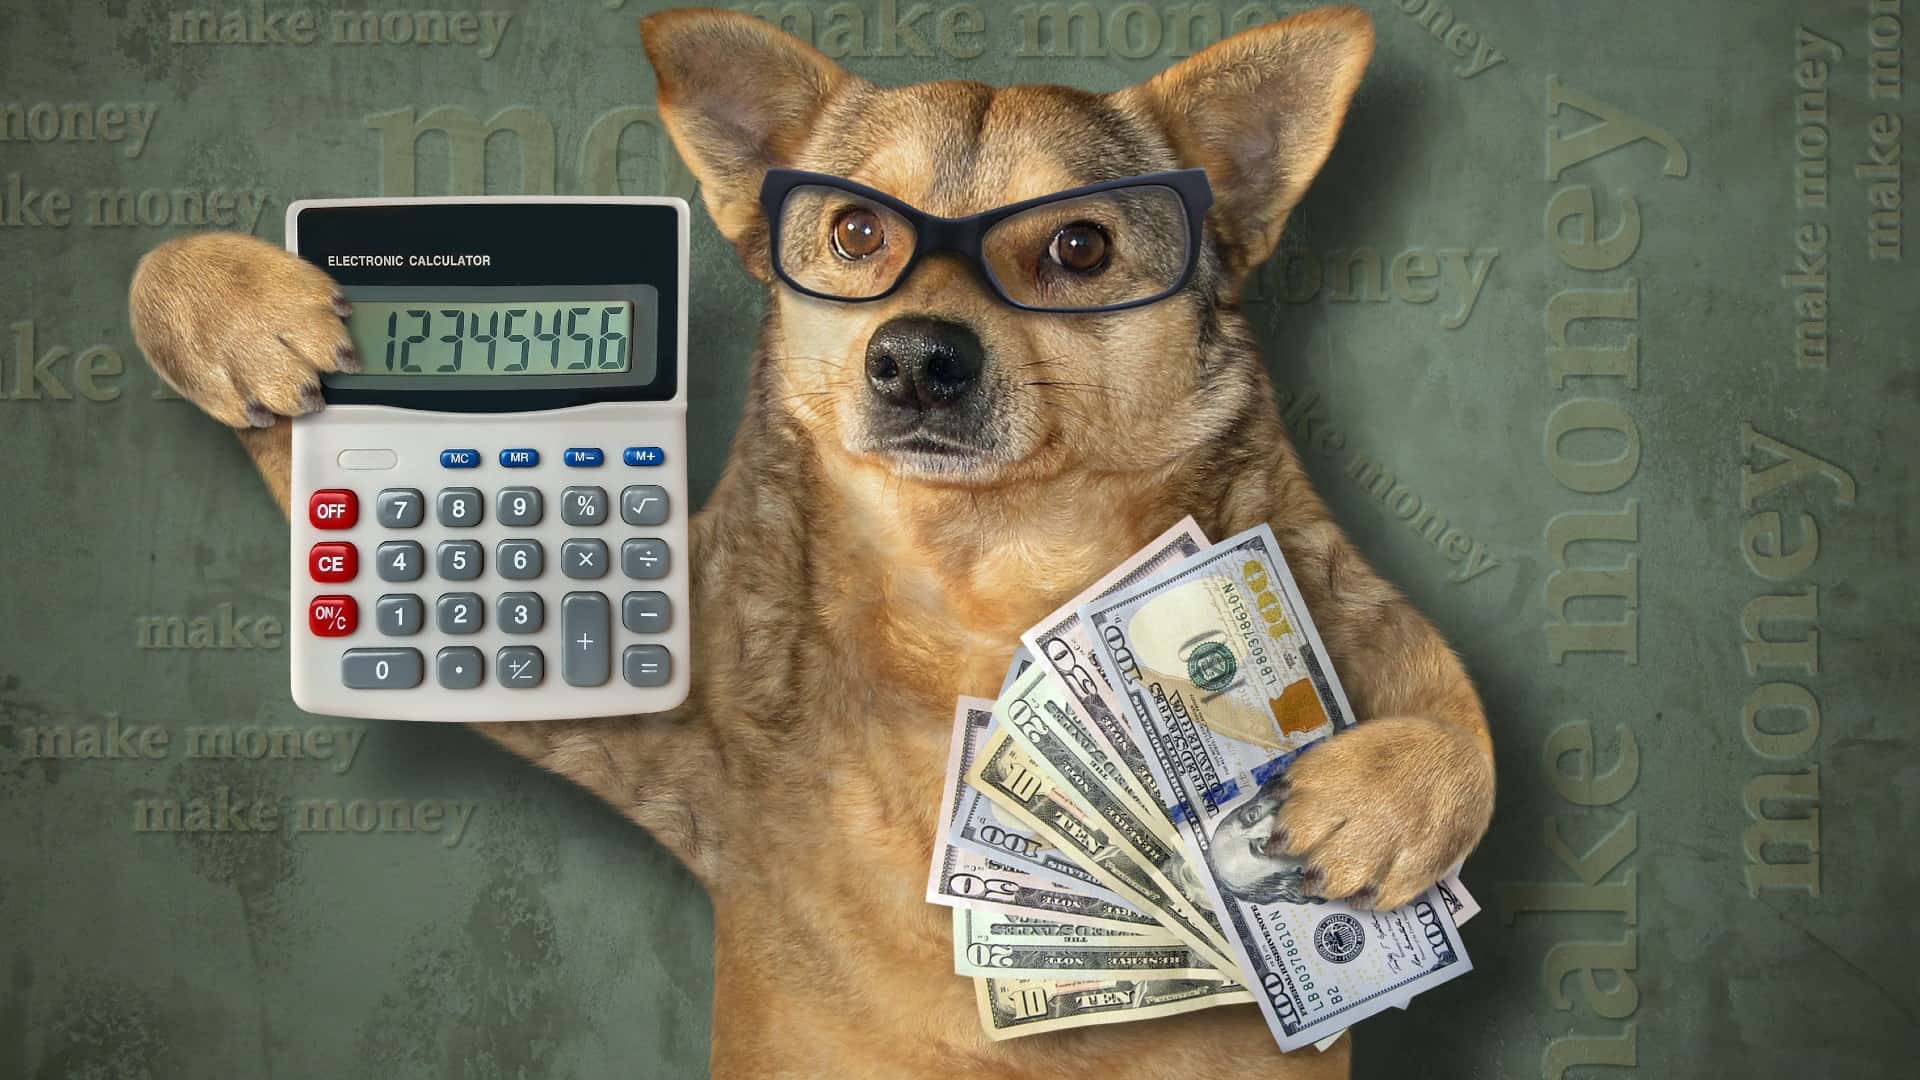 The dog businessman in glasses is holding a calculator and a fan of dollars.